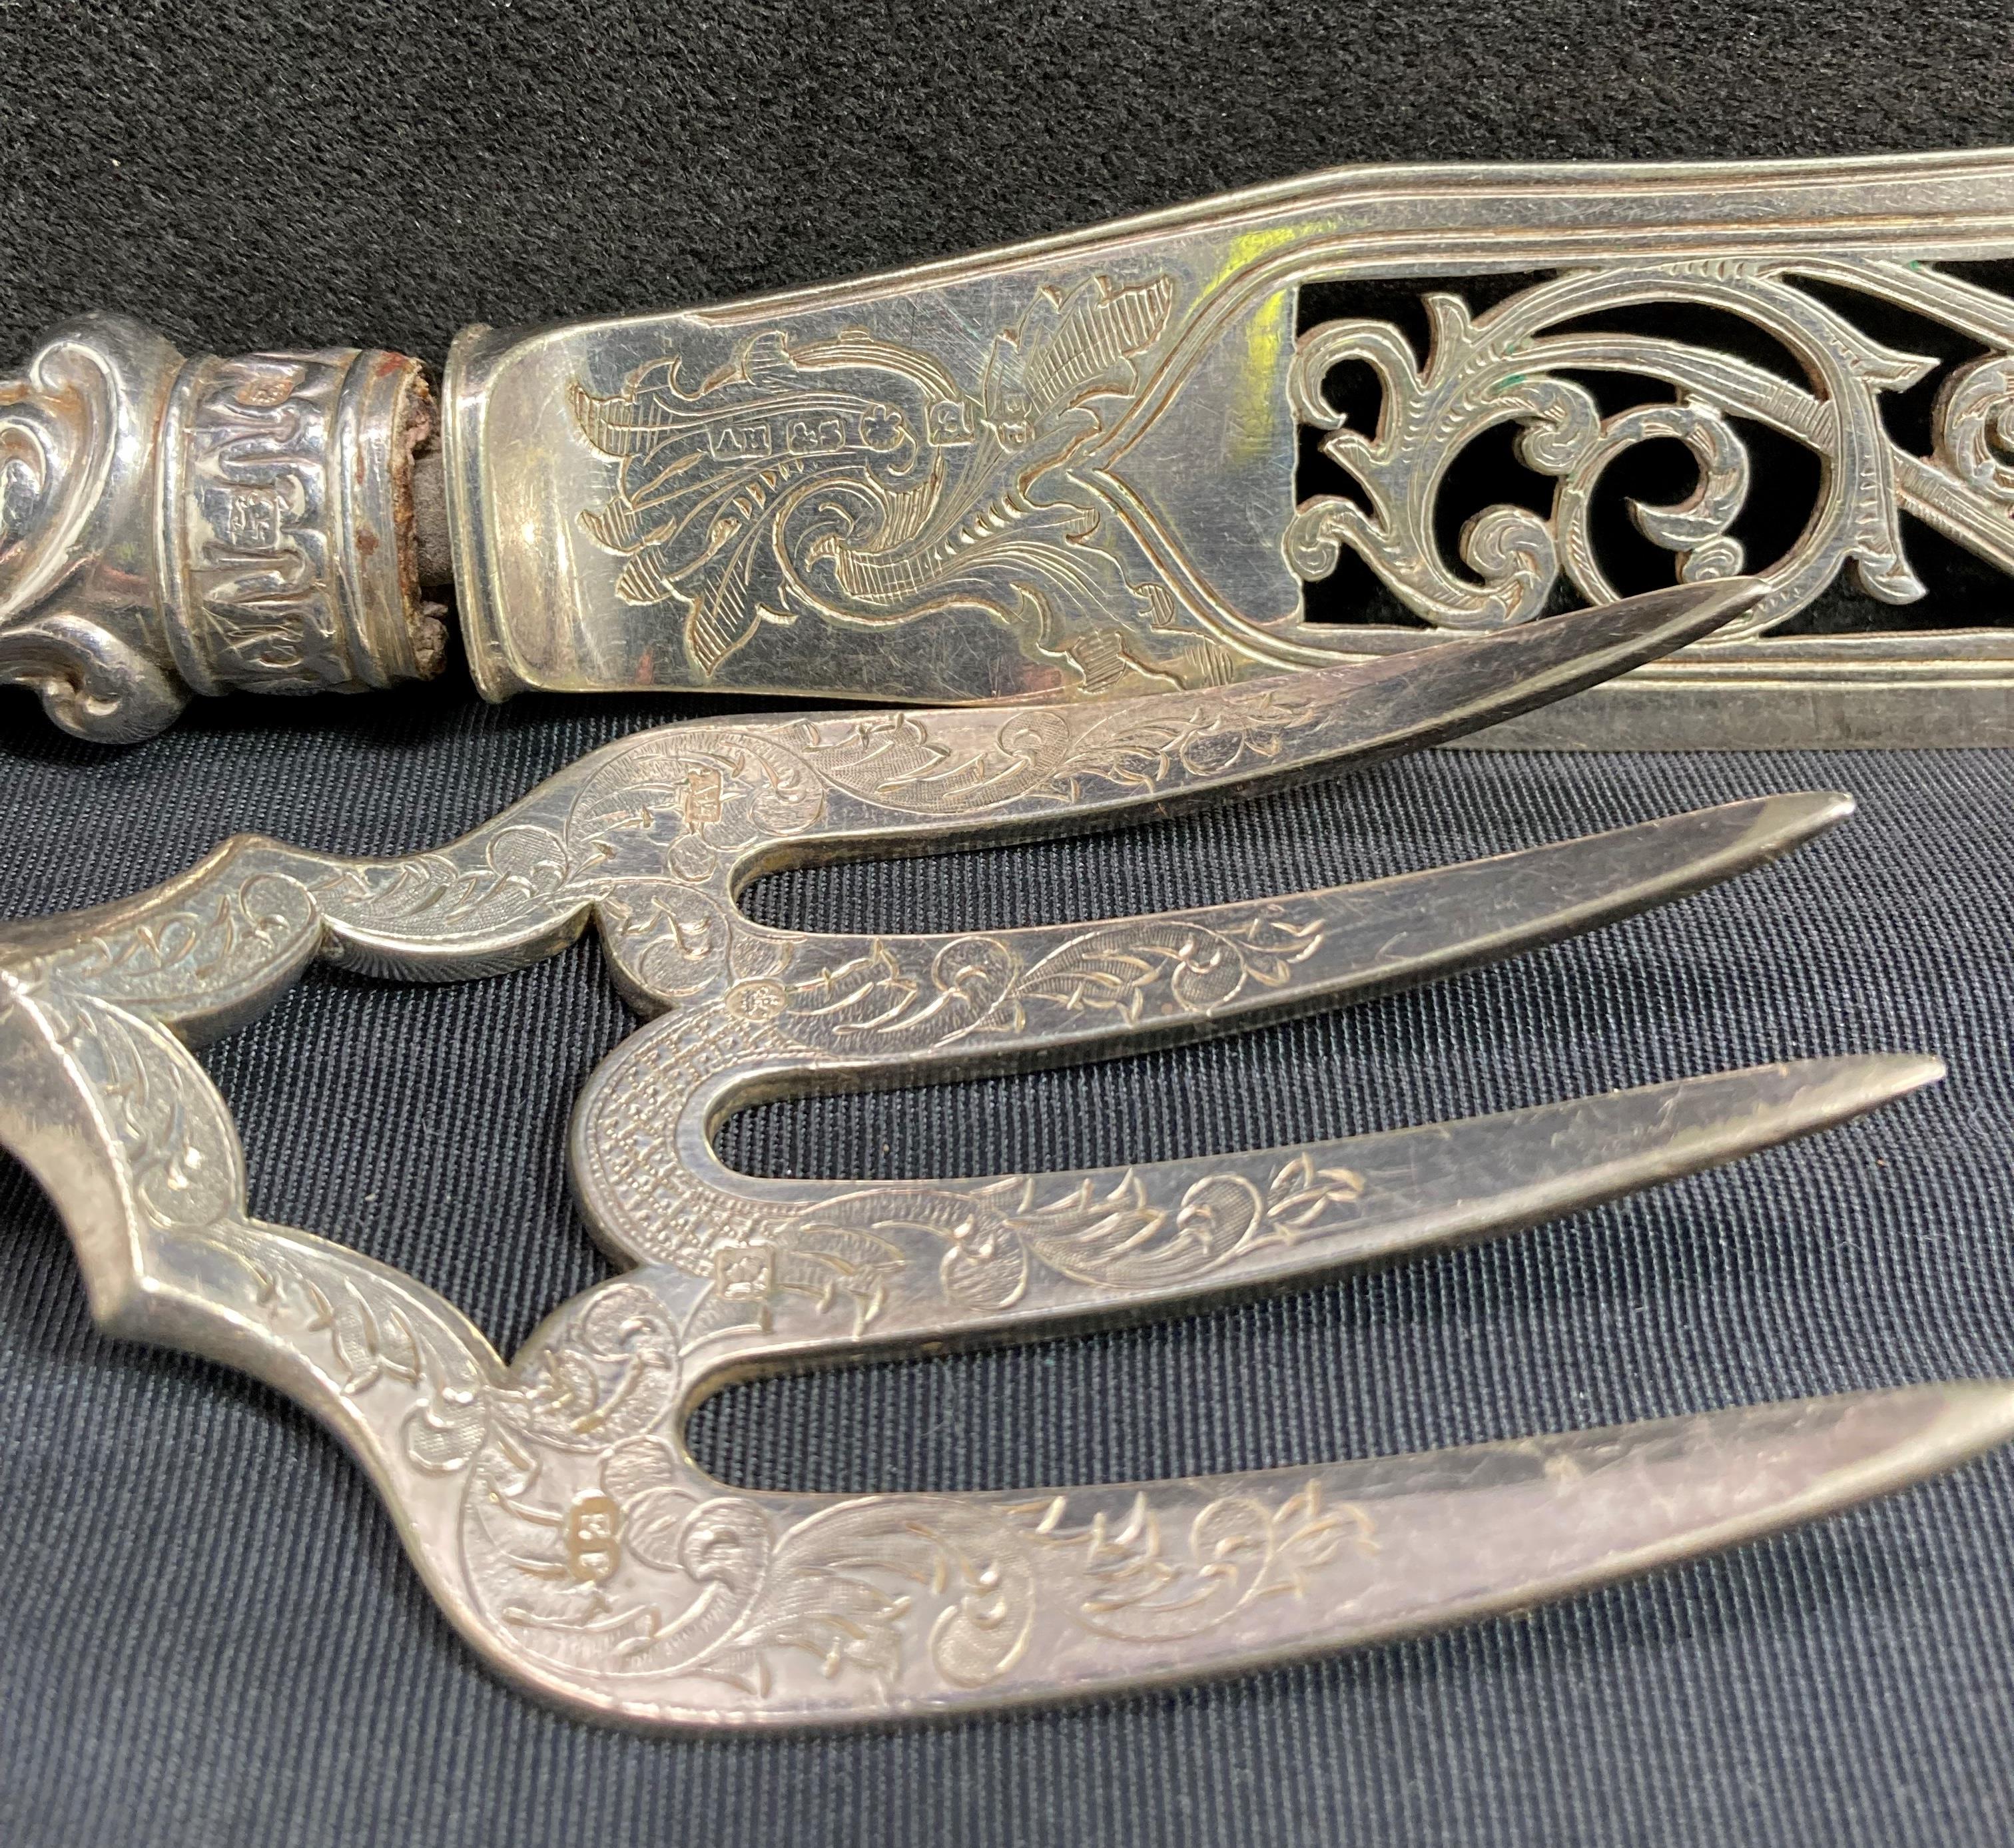 Carving set with silver hallmarked handles (possibly Sheffield late 18th century) with engraved and - Image 3 of 5